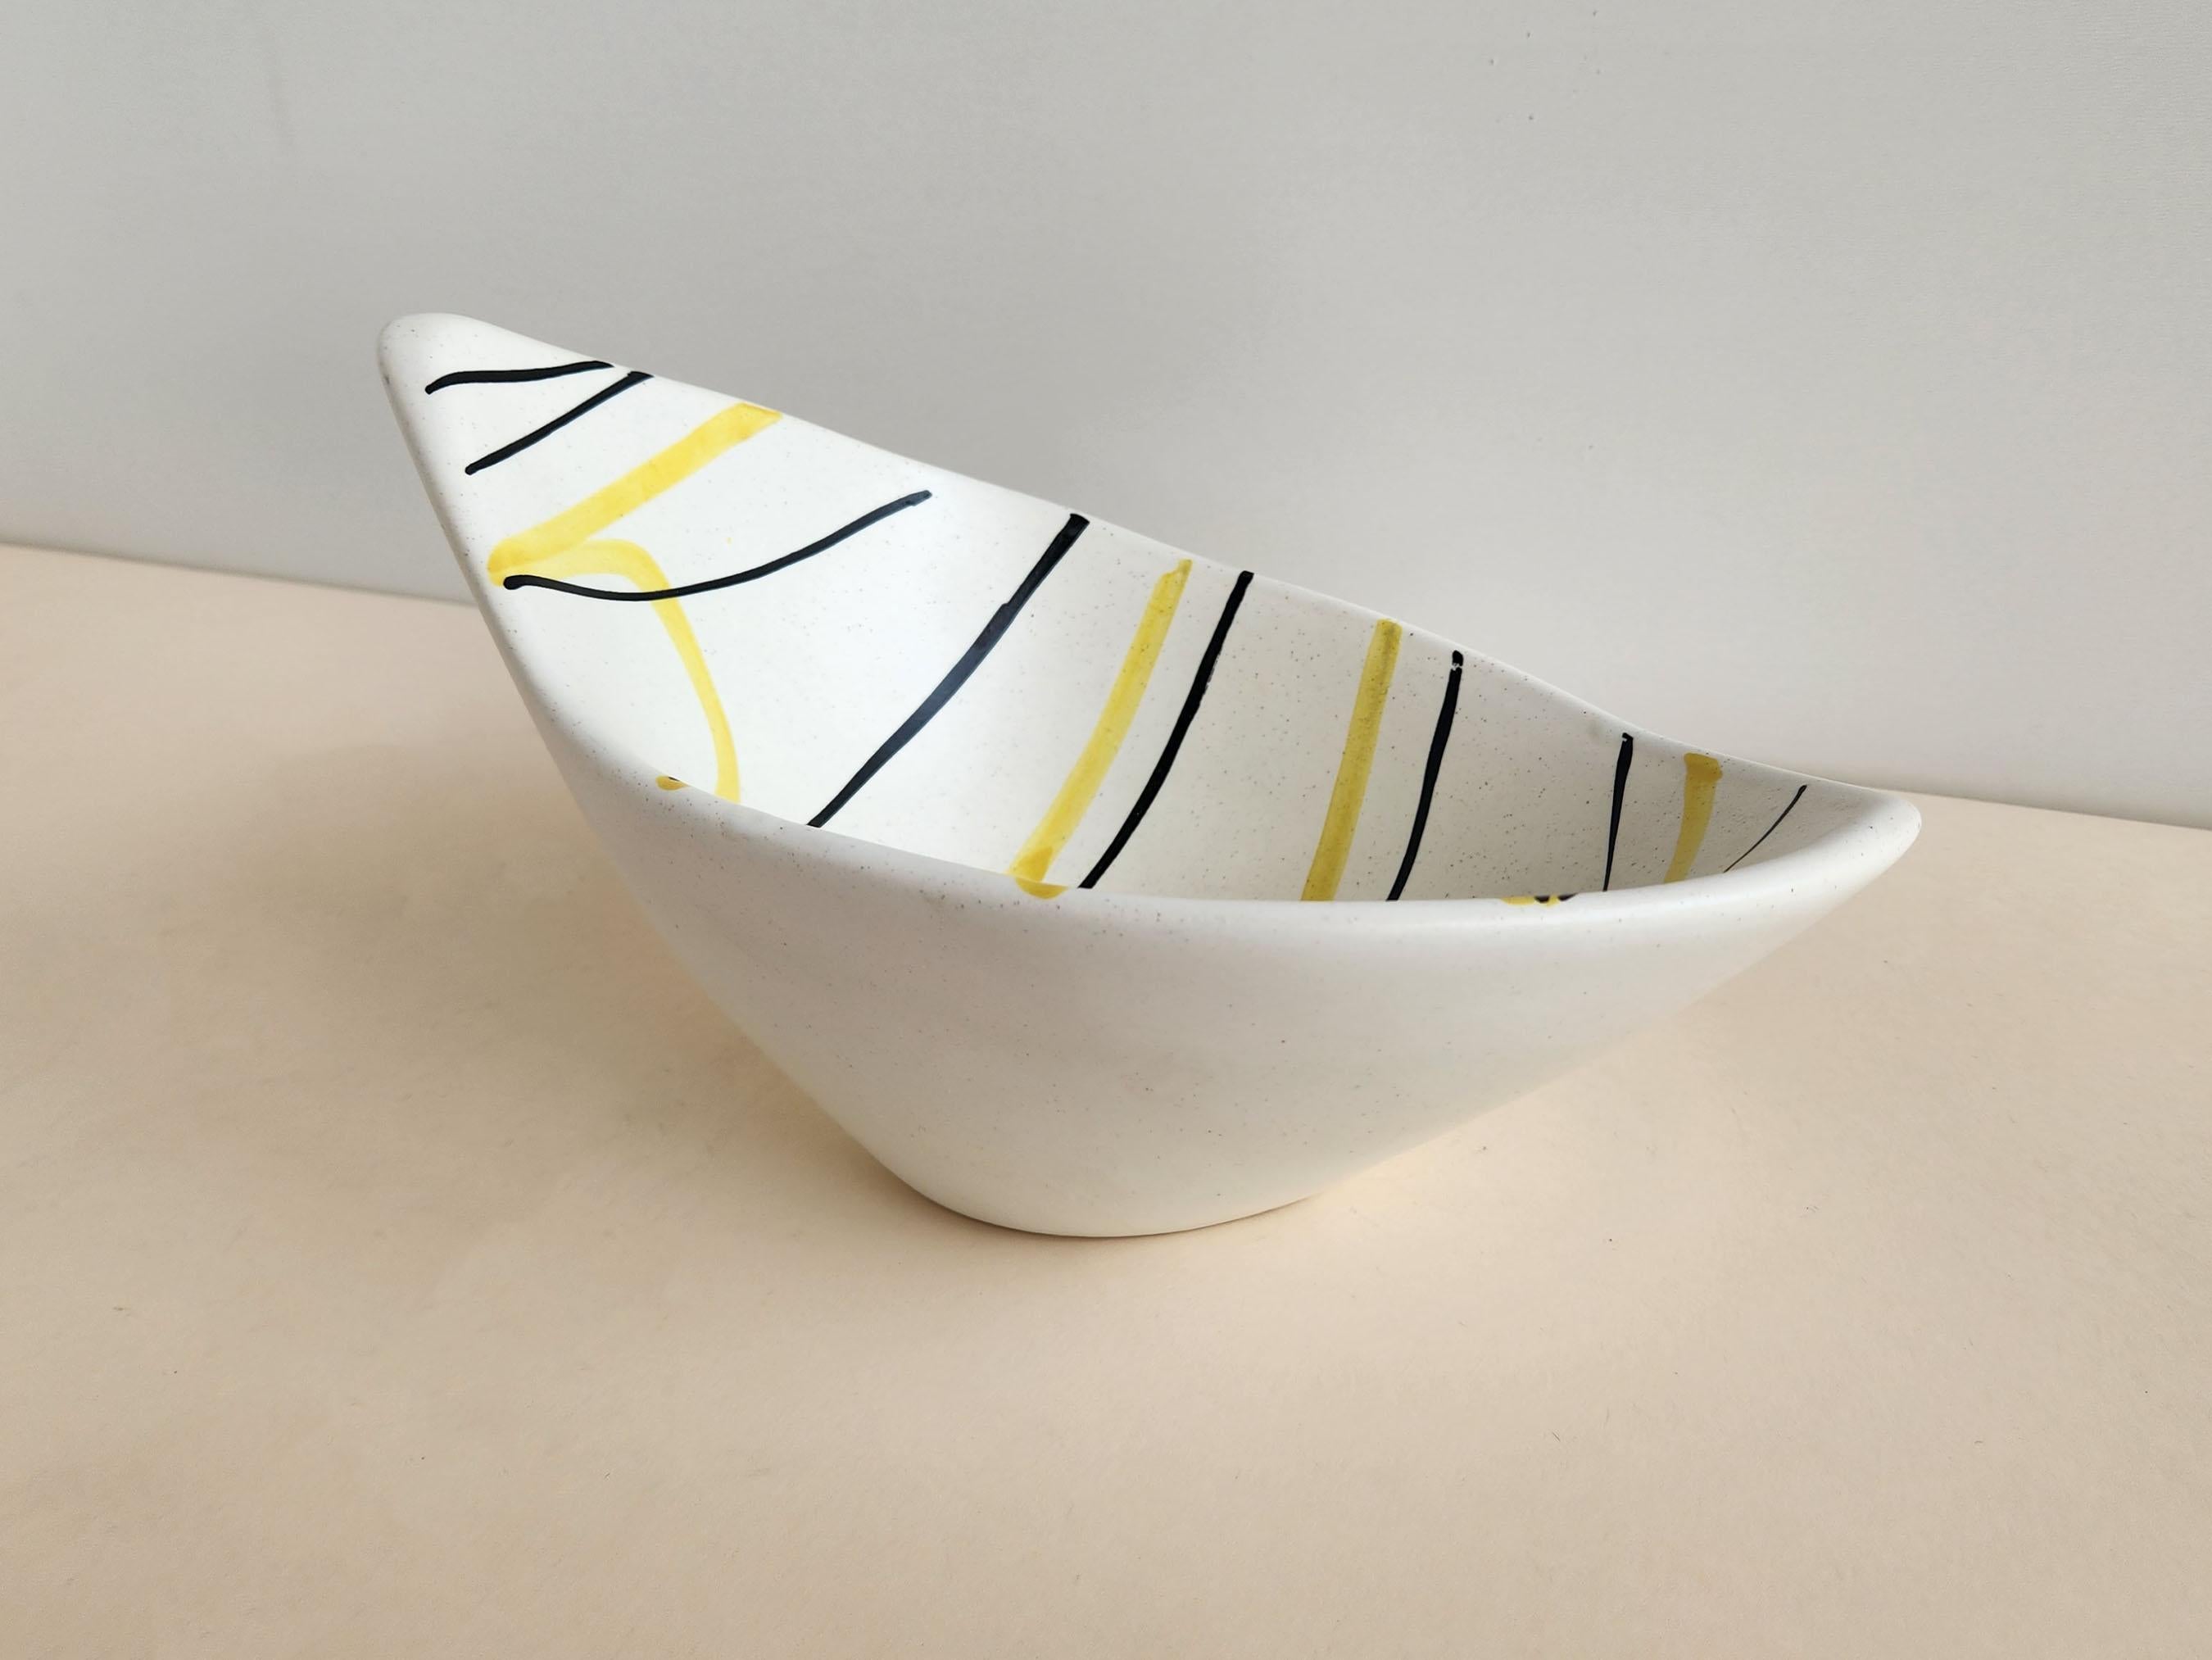 Slanted Vintage Ceramic Bowl with Yellow and Black Lines by Roger Capron - Vallauris, France

Roger Capron was in influential French ceramicist, known for his tiled tables and his use of recurring motifs such as stylized branches and geometrical